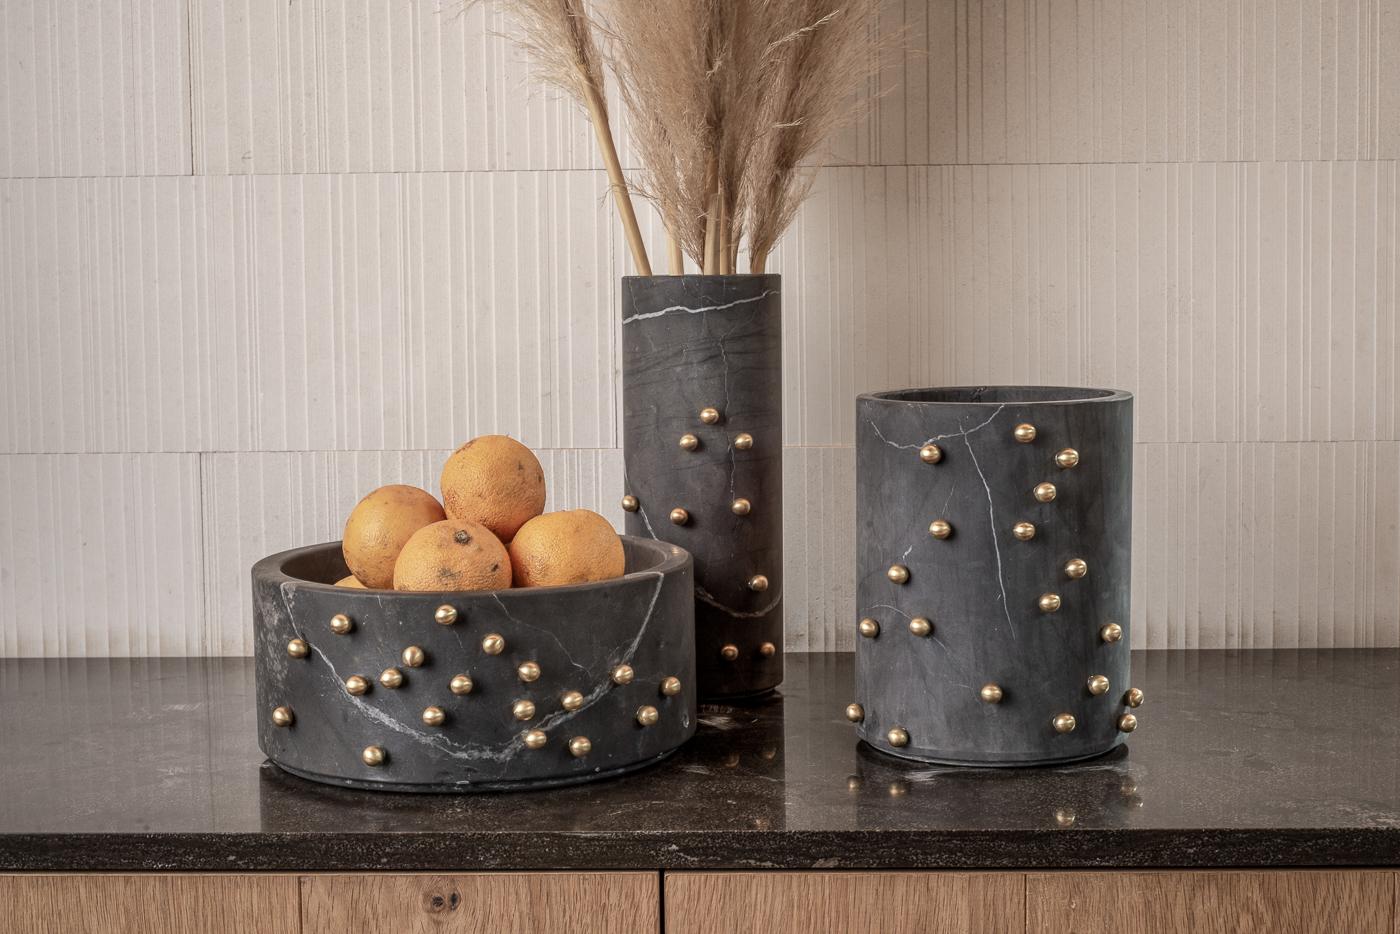 Elevate your decor with our exquisite cylindrical bowl adorned with lustrous brass sprinkles that seem to dance at random intervals along its sides. This elegant and daring bowl is a showstopper on any set, whether it's holding a vibrant bouquet of